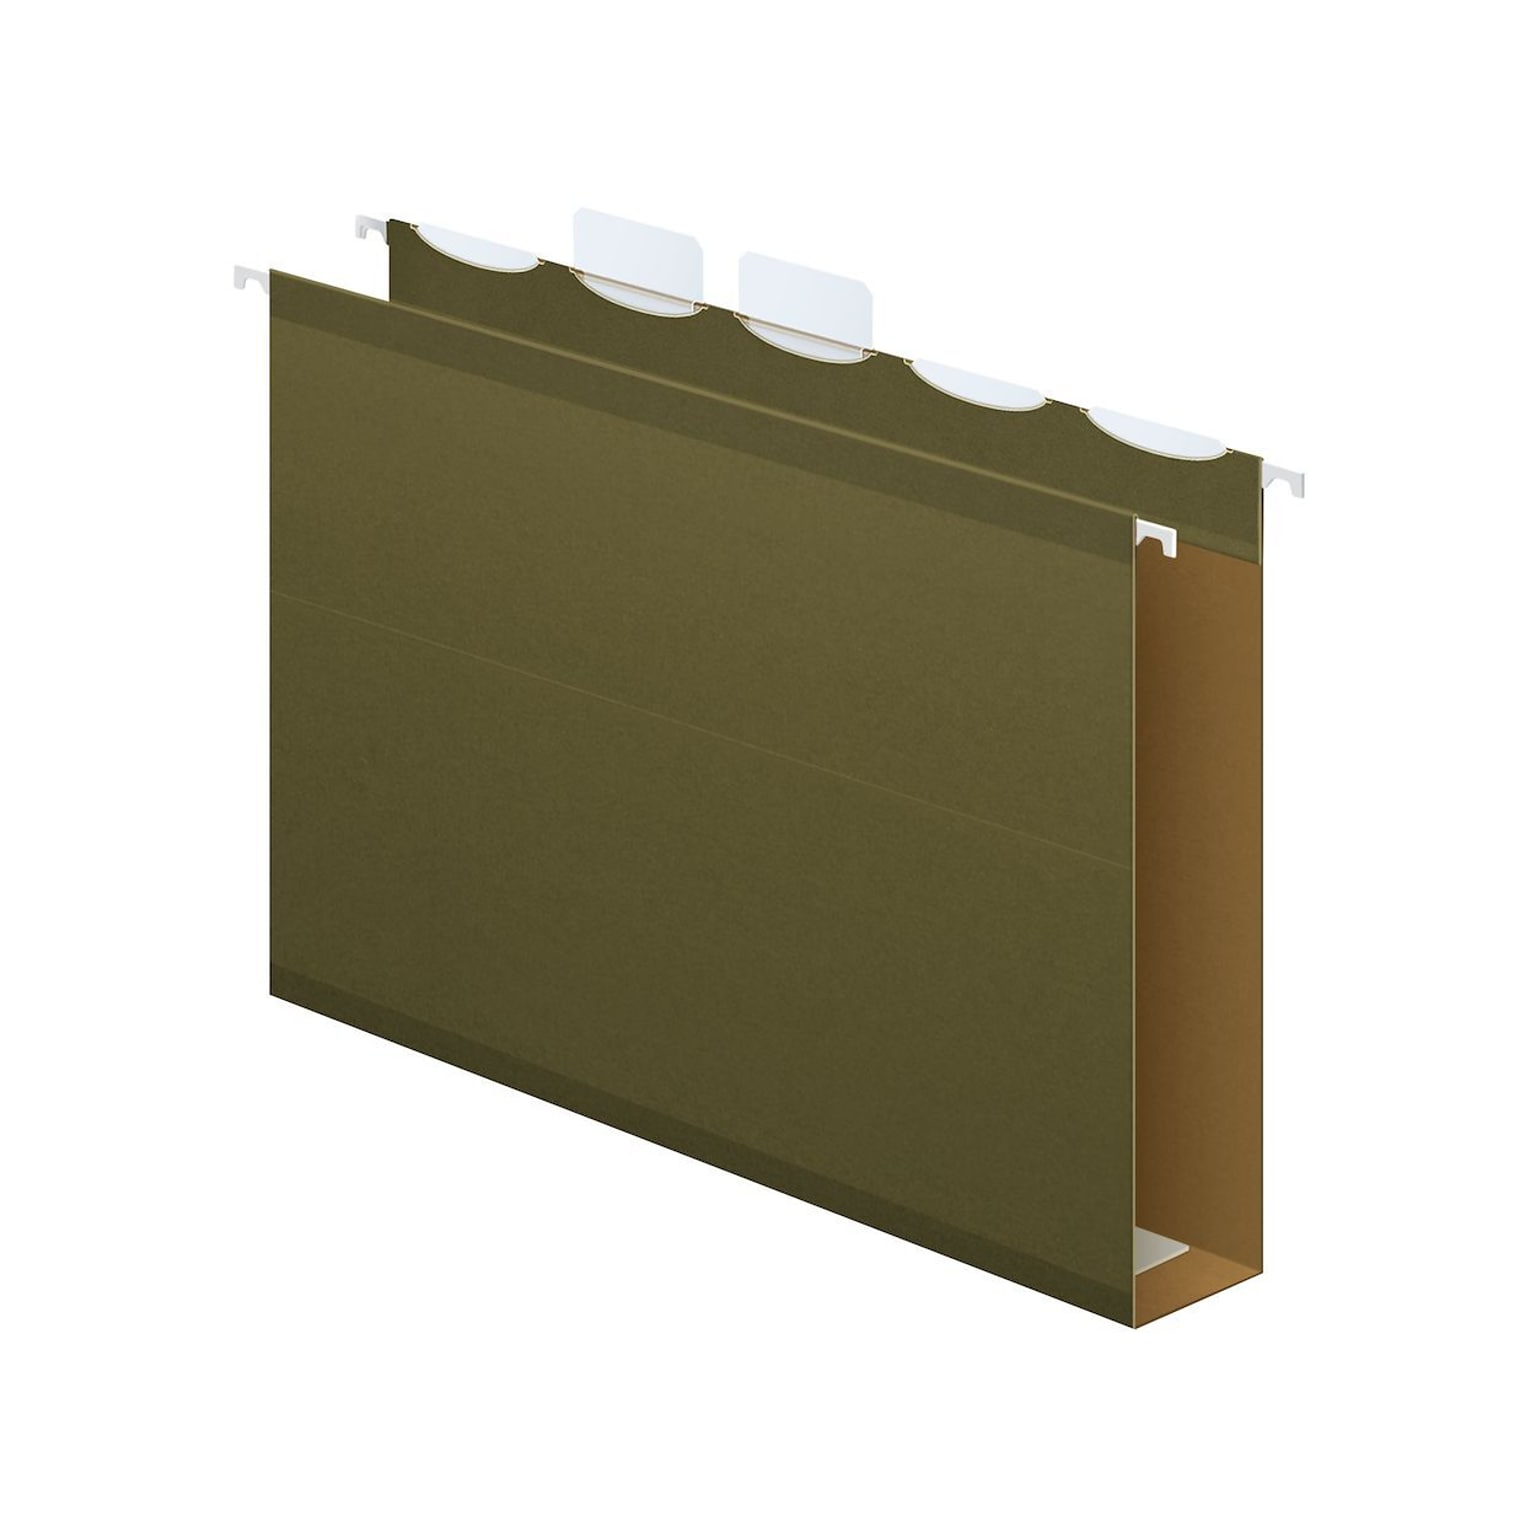 Pendaflex Ready-Tab Reinforced Recycled Hanging File Folder, 2 Expansion, 5-Tab Tab, Letter Size, Green, 20/Box (42701)